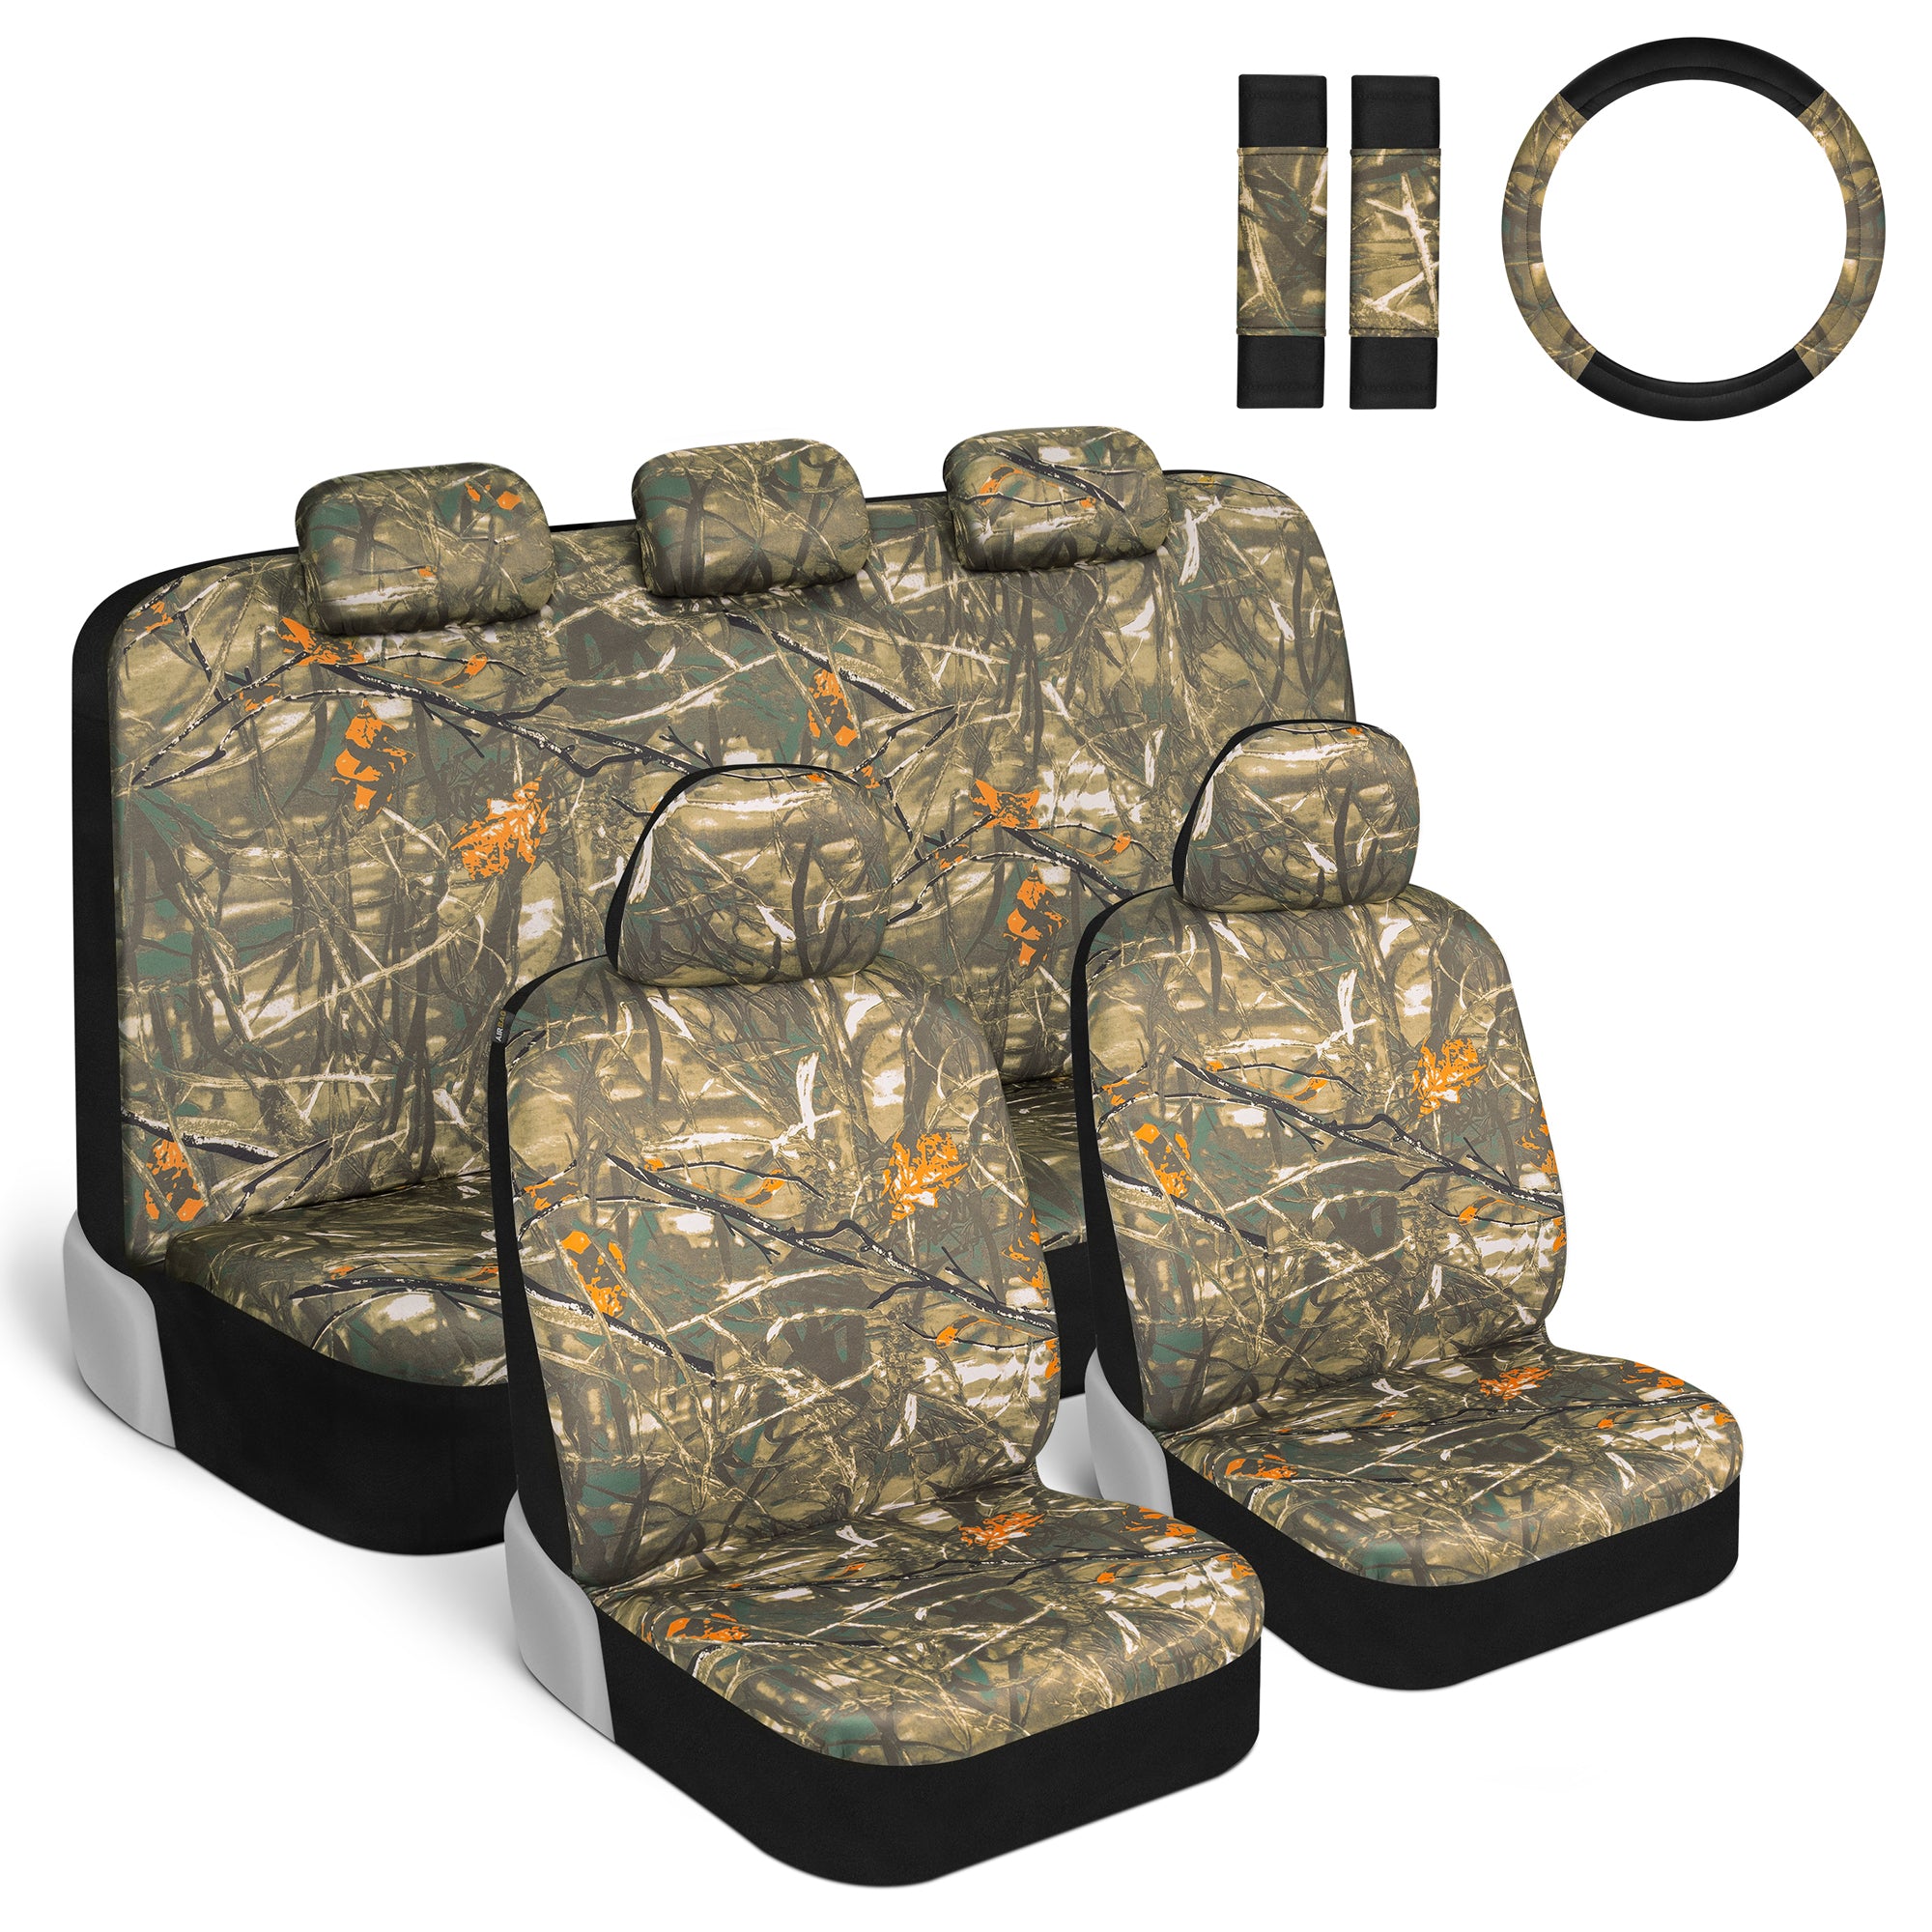 BDK Hunter Camo Car Seat Covers Full Set with Steering Wheel Cover and Seat Belt Pads – Real Mossy Tree Oak Forest Camouflage Pattern, Automotive Front & Bench Back Seat Cover for Cars Trucks SUV